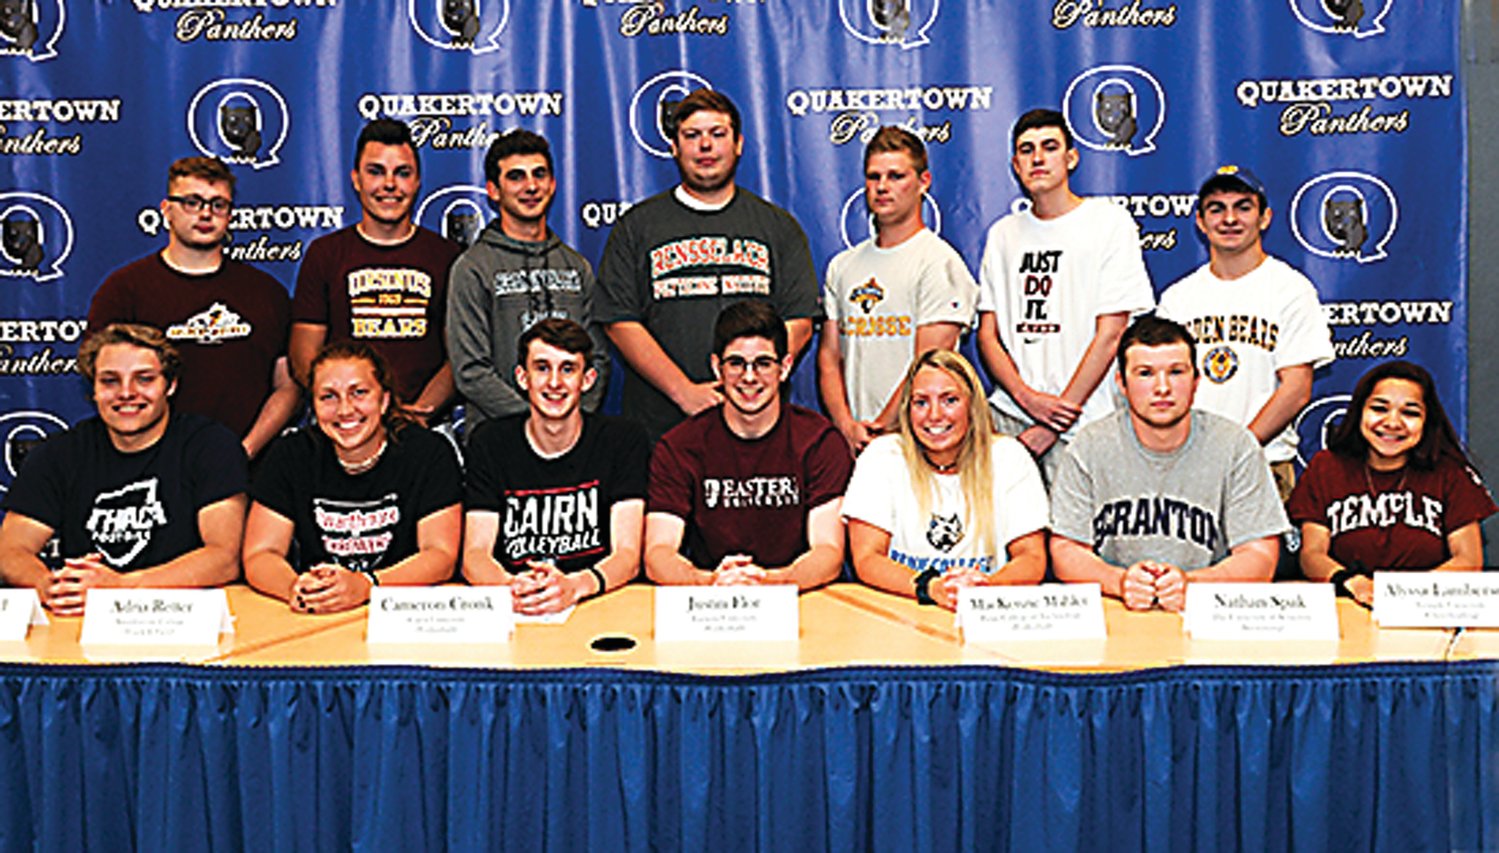 At Quakertown Community High School’s college commitment ceremony are, from left, front row, Ashton Herd, Adria Retter, Cameron Cronk, Justin Flor, Mackenzie Mahler, Nathan Spak, Alyssa Lamberson; back row, Justin Bennett, Will Chenoweth, Brad Bryan, Riley Davis, Jeff Royall, Matt Lucas and Corey Cope. Photograph by Mary Jane Souder.